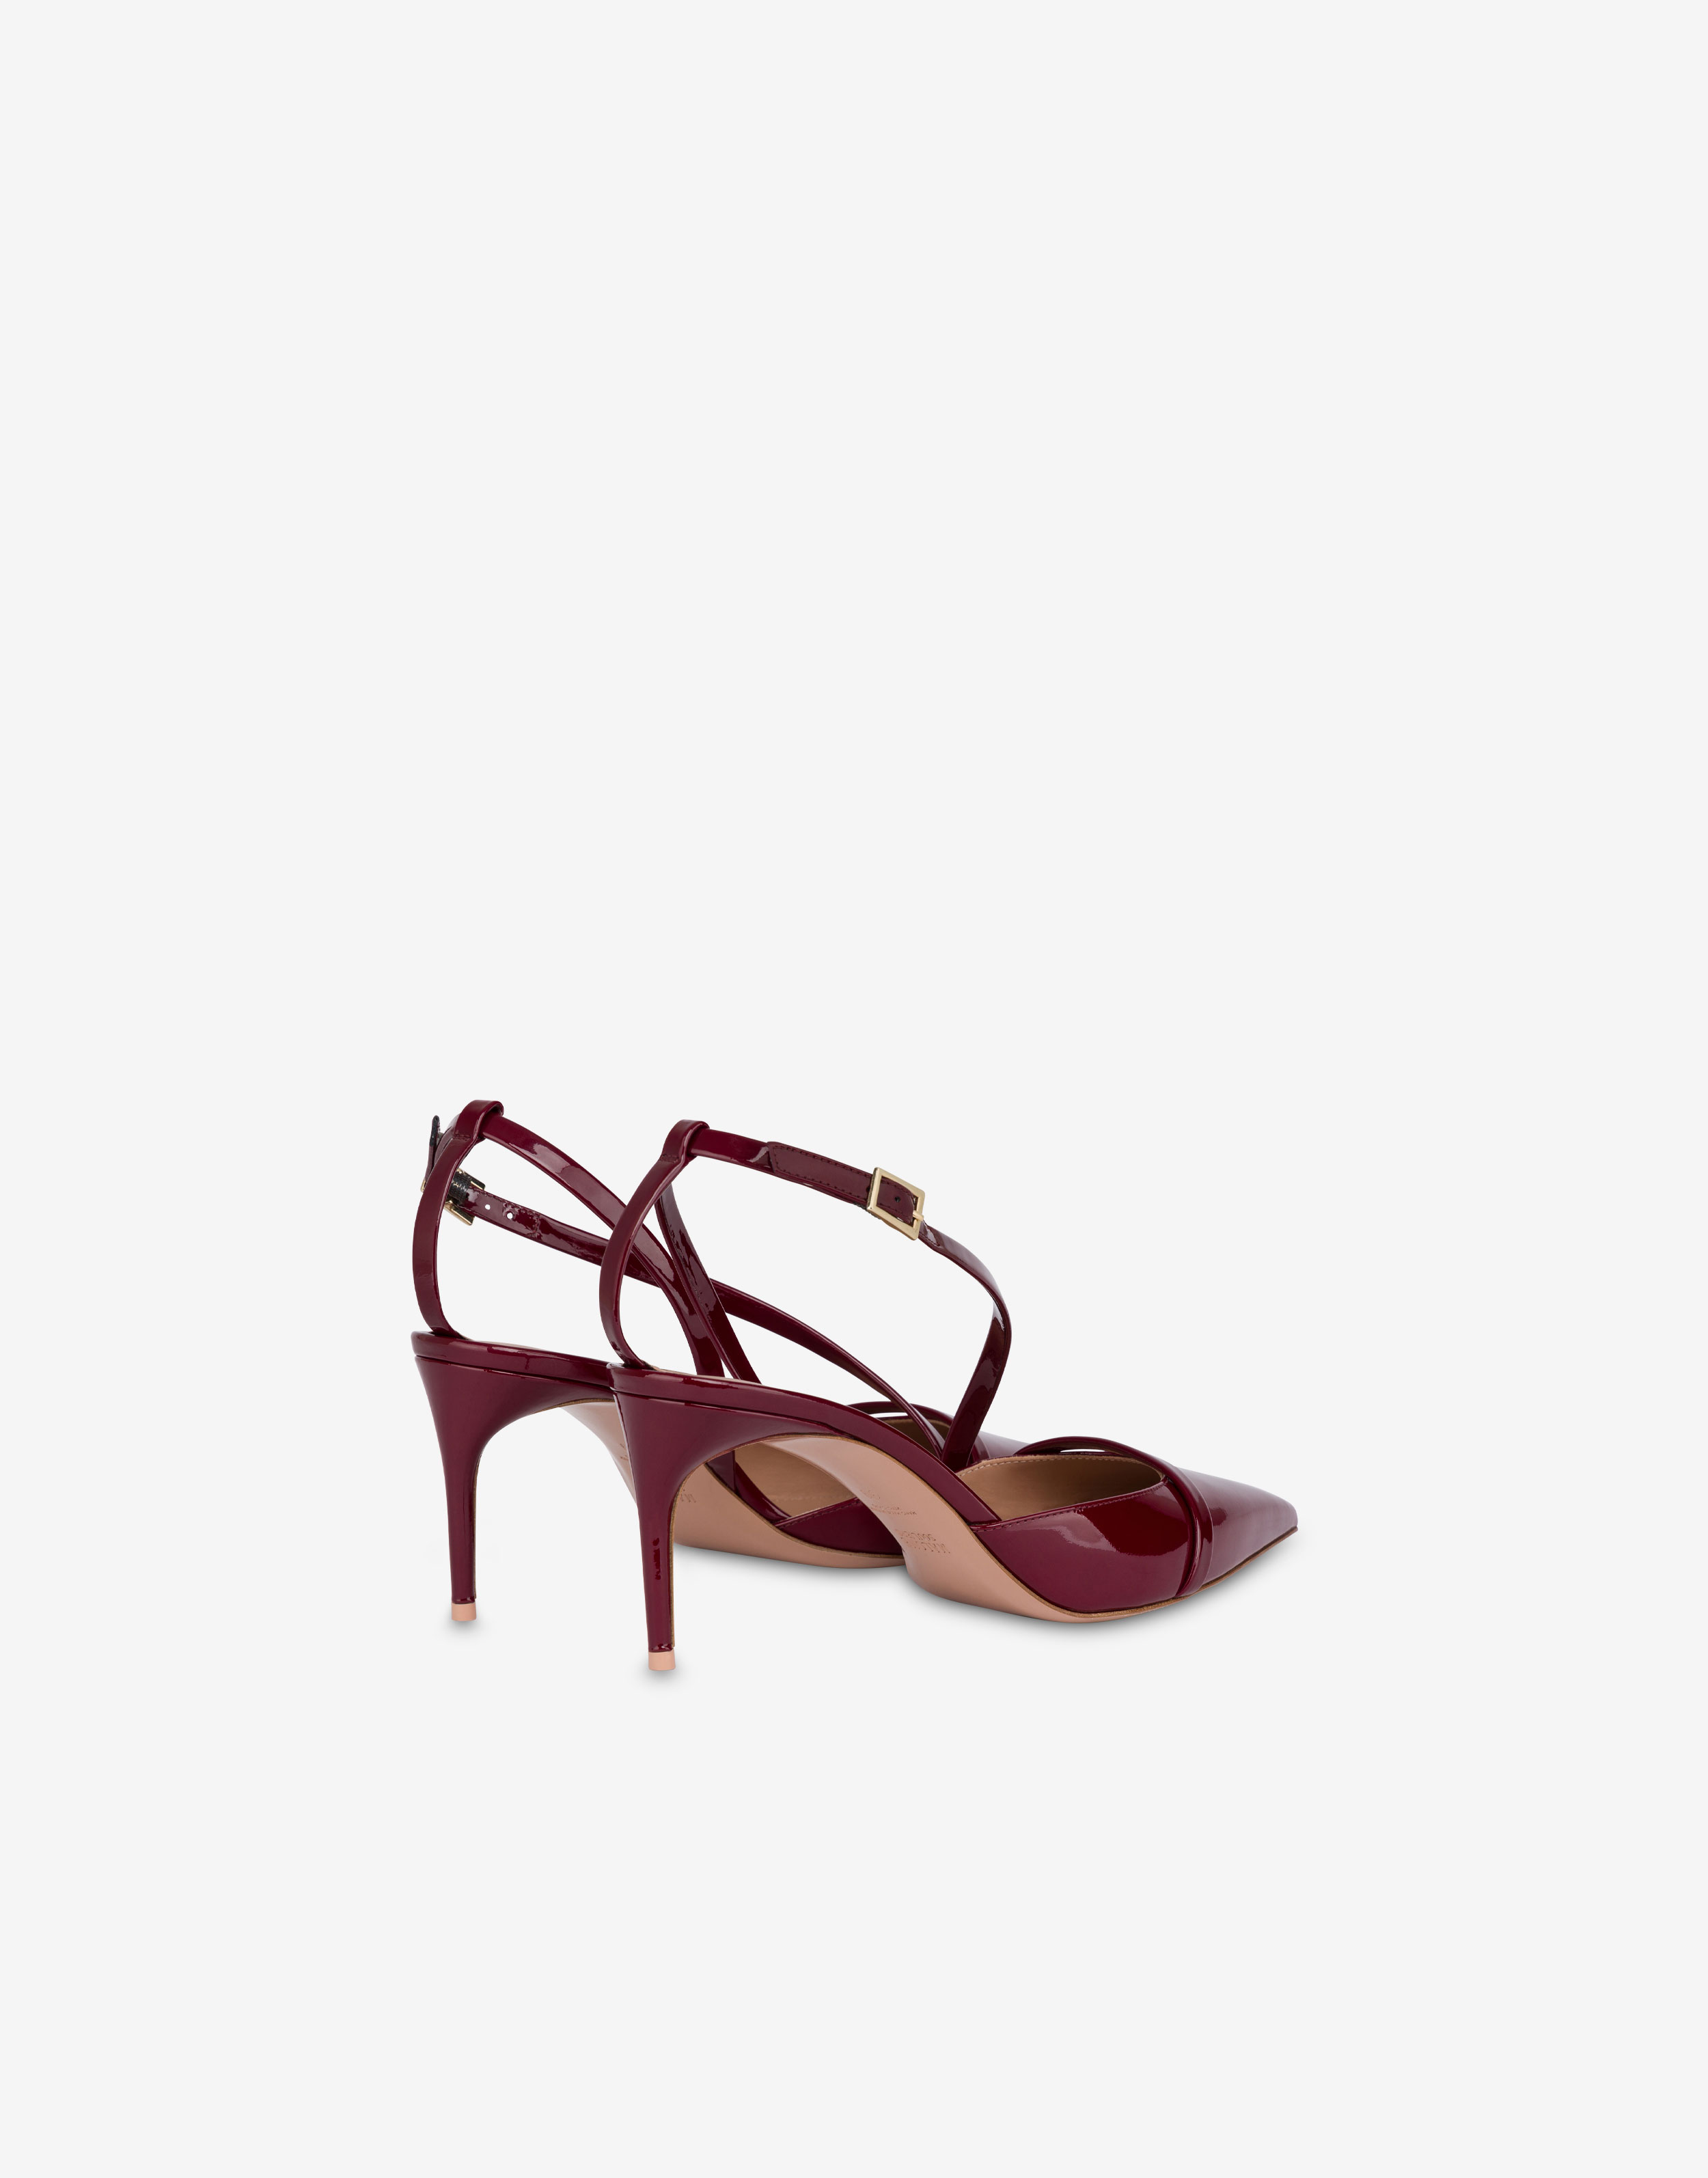 Malone Souliers x Philosophy patent leather slingback